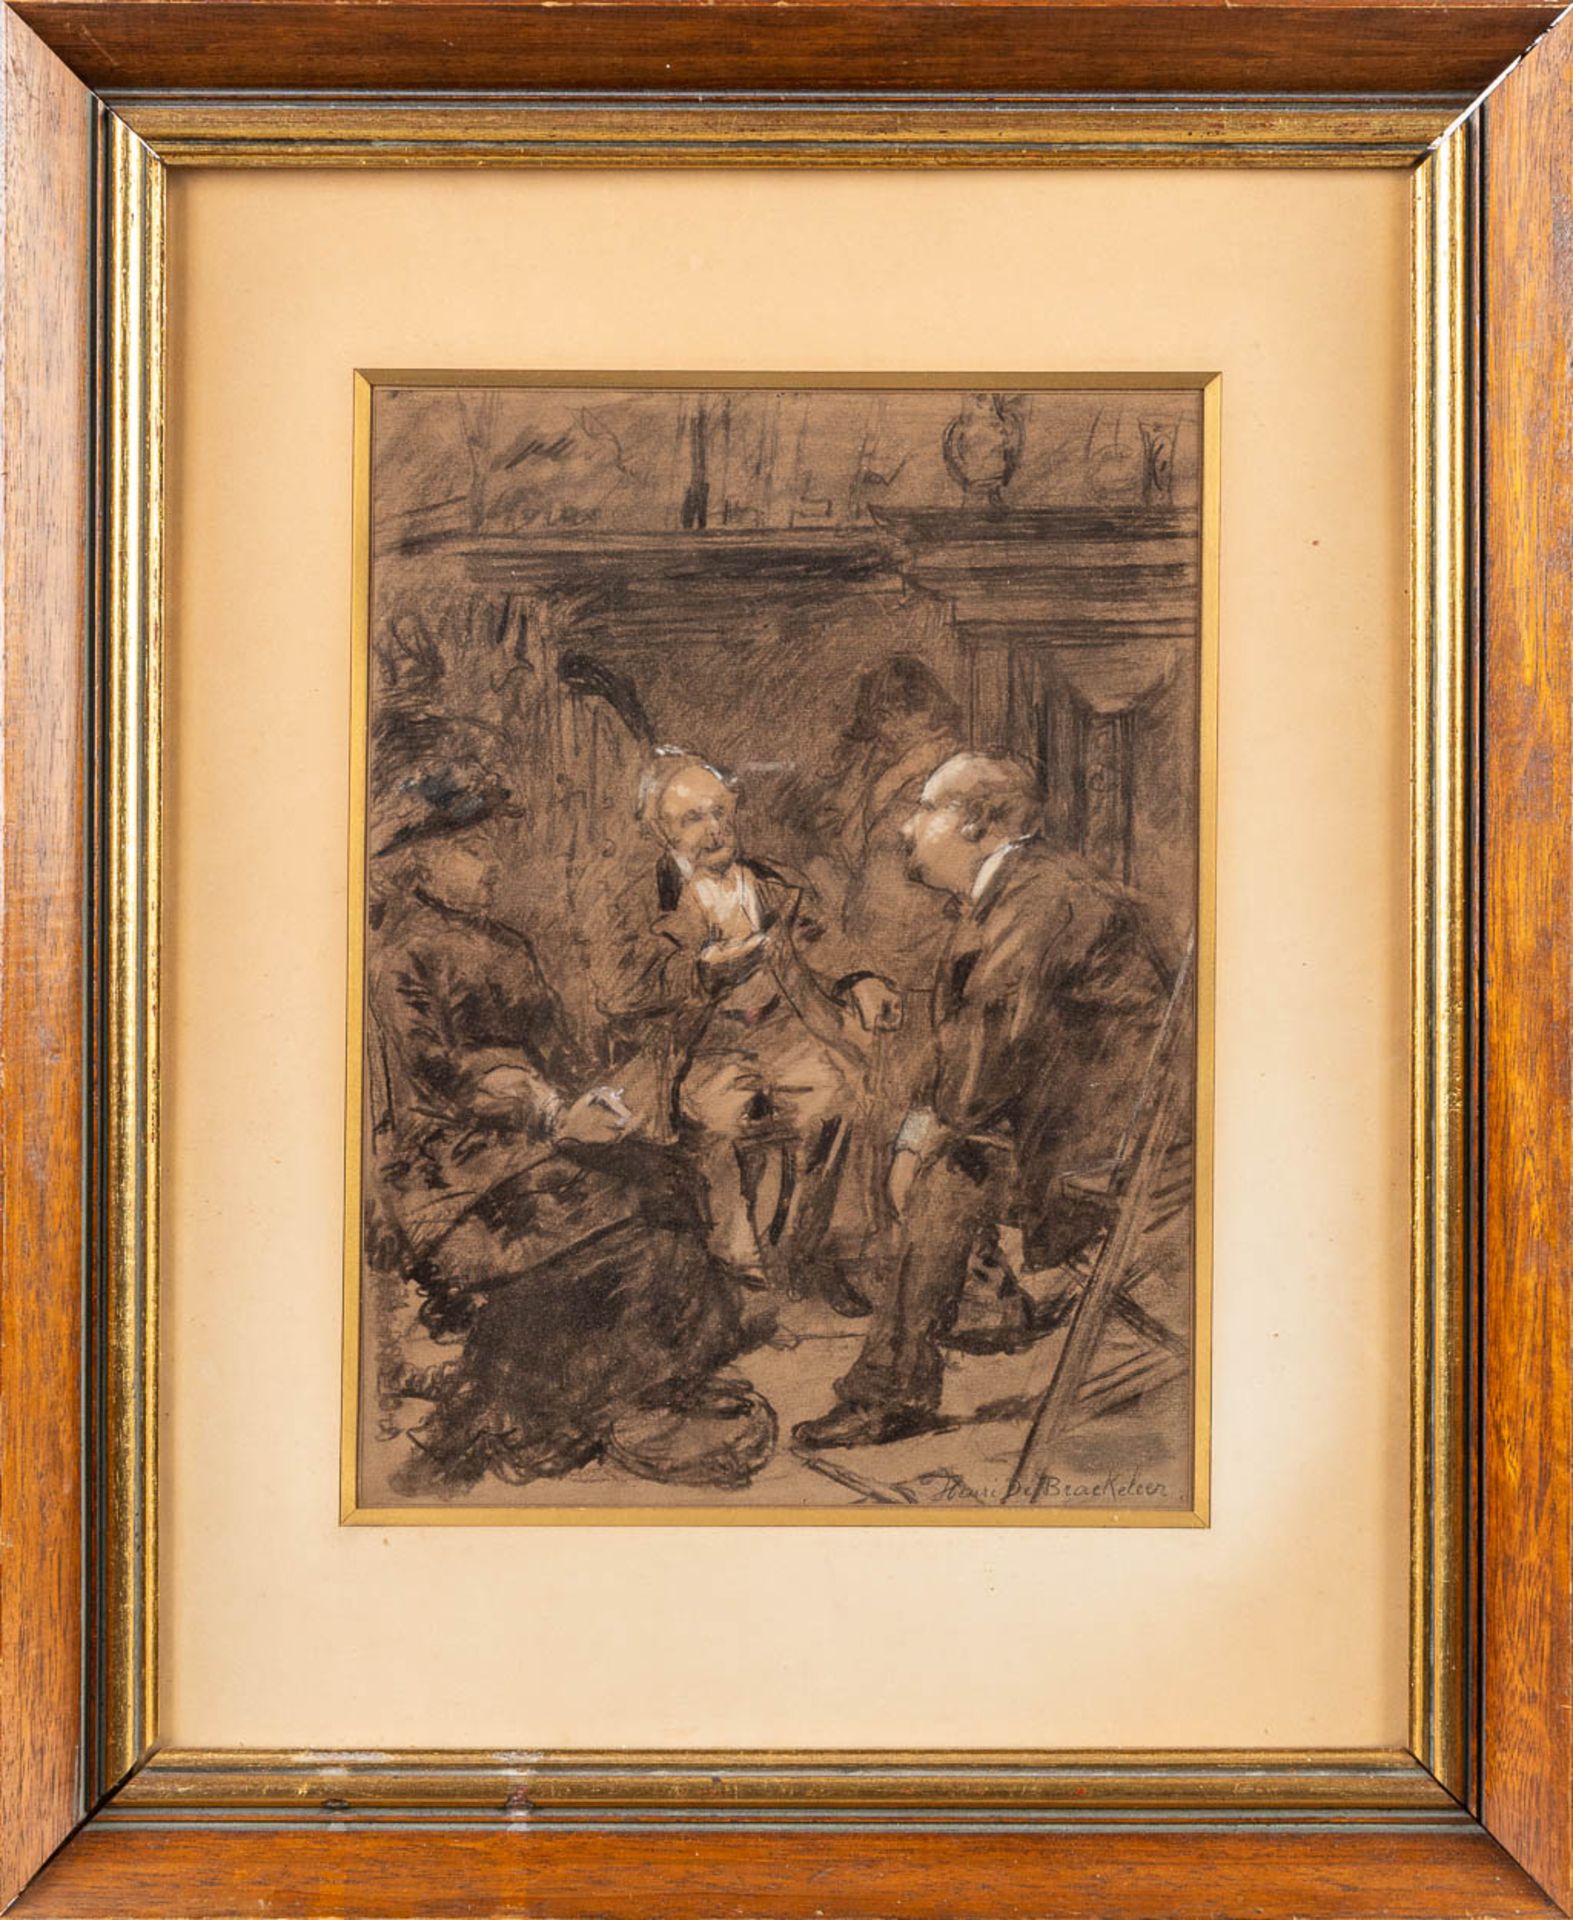 Henri DE BRAEKELEER (1840-1888) 'The conversation', a drawing on paper. (26 x 35cm) - Image 4 of 6